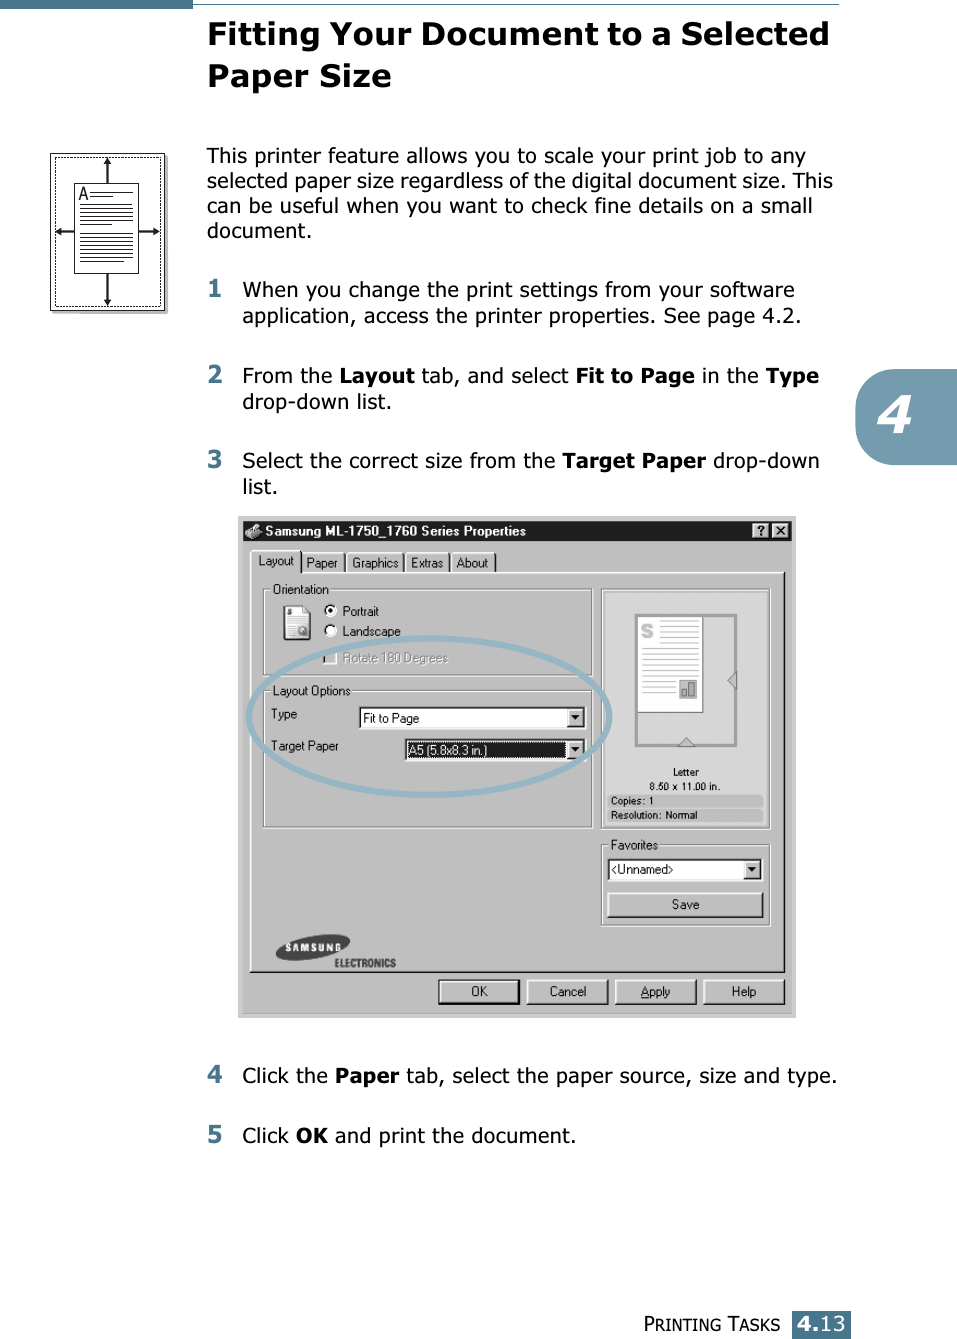 PRINTING TASKS4.134Fitting Your Document to a Selected Paper SizeThis printer feature allows you to scale your print job to any selected paper size regardless of the digital document size. This can be useful when you want to check fine details on a small document. 1When you change the print settings from your software application, access the printer properties. See page 4.2.2From the Layout tab, and select Fit to Page in the Type drop-down list. 3Select the correct size from the Target Paper drop-down list.4Click the Paper tab, select the paper source, size and type.5Click OK and print the document.A